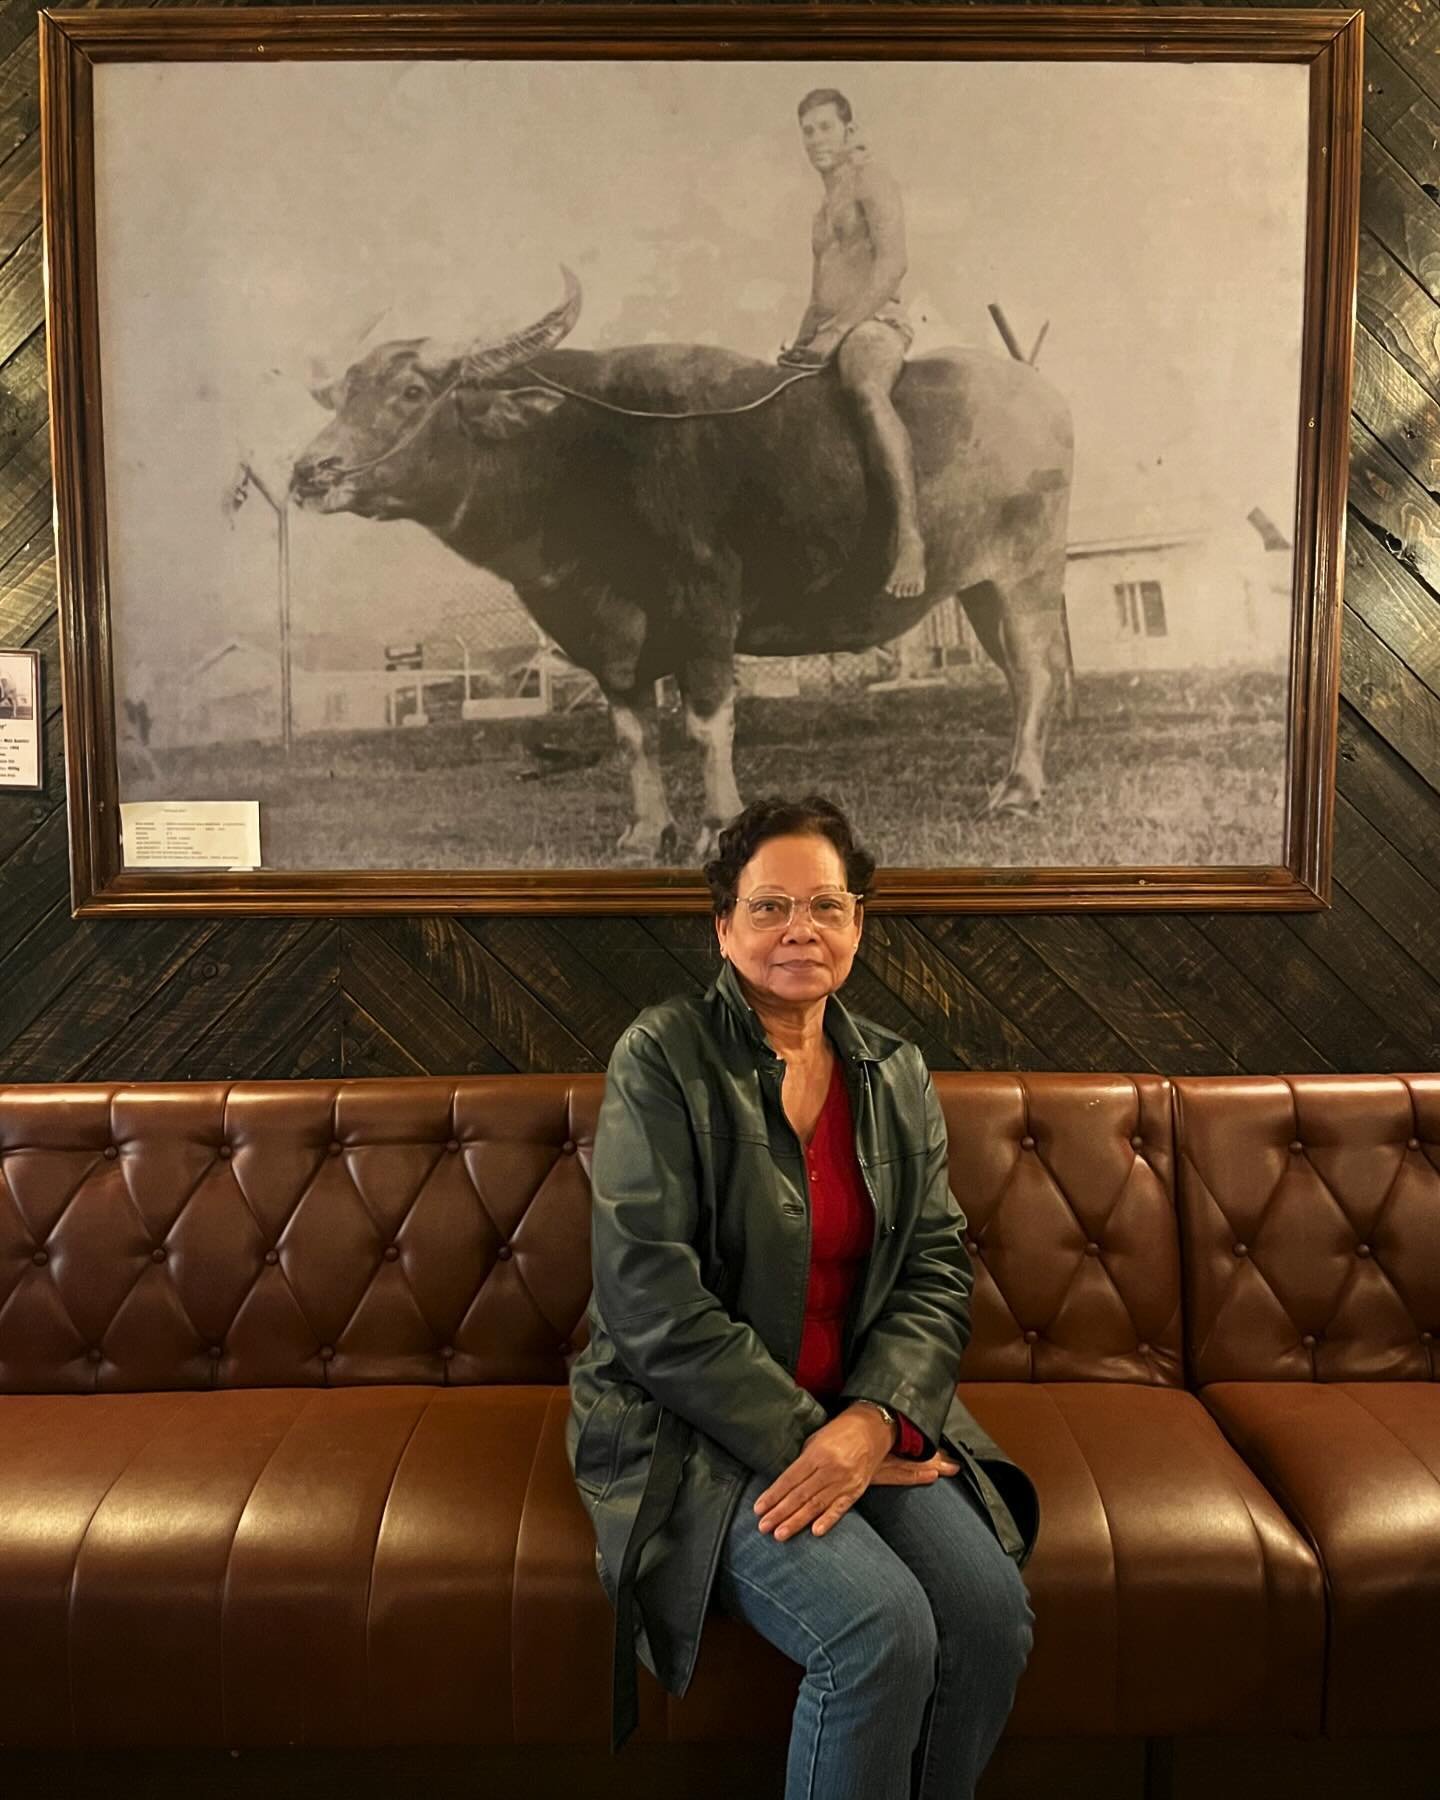 Buffalo Boy Wife is in tha House 🙌 
Visiting us from Taiping Malaysia 13,500km away! It&rsquo;s been a great honour to welcome &ldquo;name&rdquo; to her husband&rsquo;s namesake Buffalo Boy 🙏🥩🥩🥩🔥
#buffaloboysteakhouse #carrickonshannon #leitrim